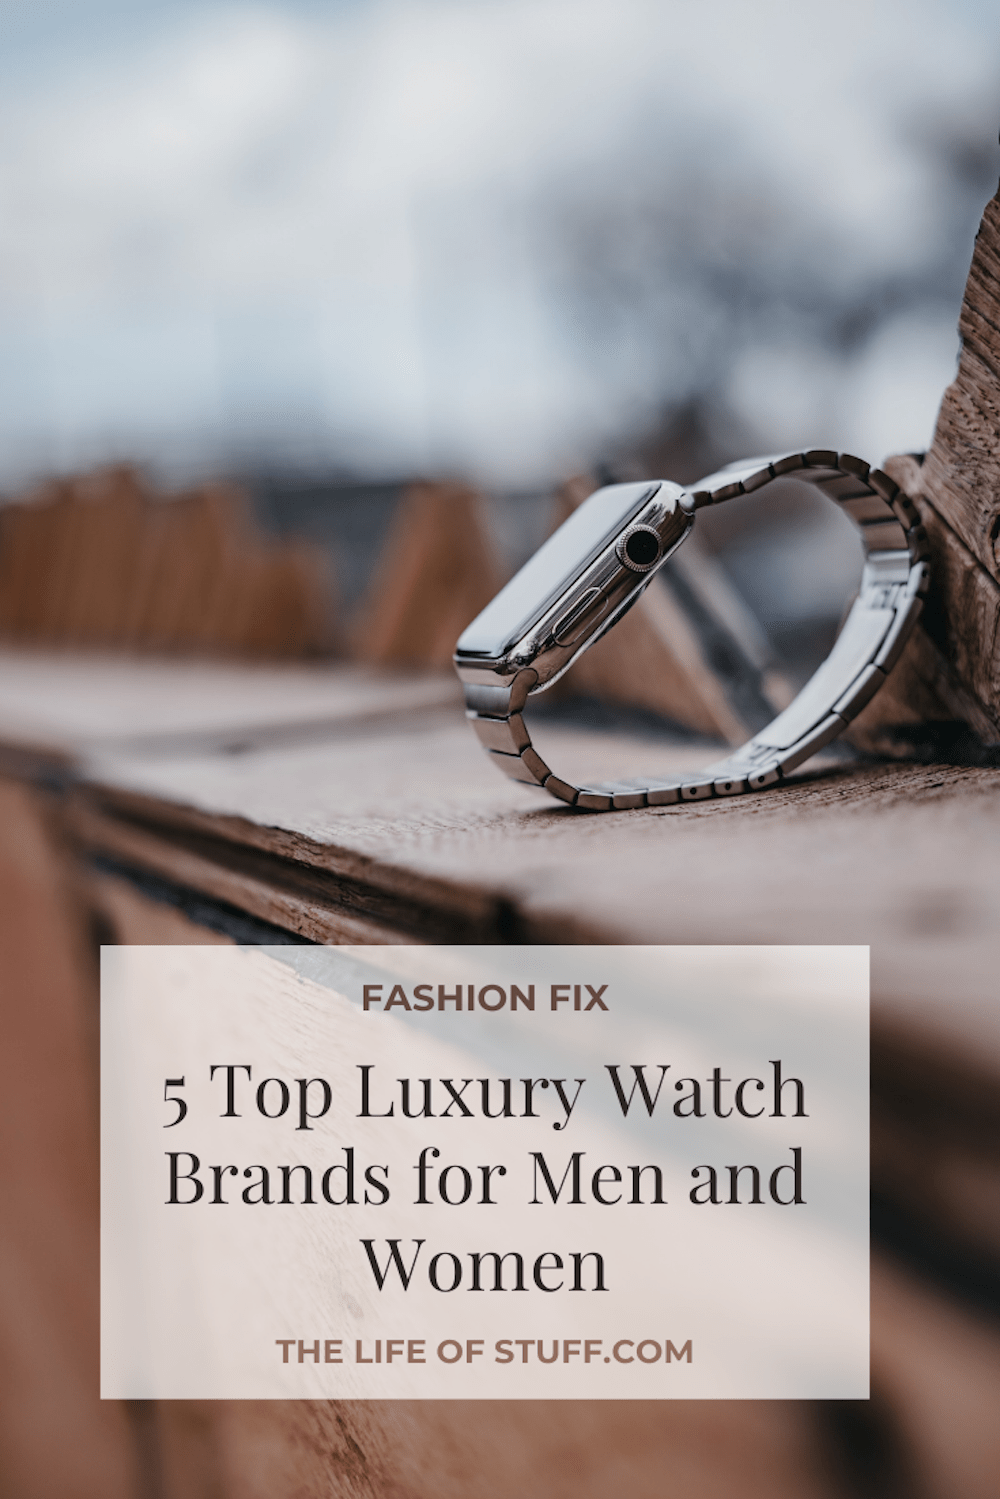 5 Top Luxury Watch Brands for Men and Women - The Life of Stuff